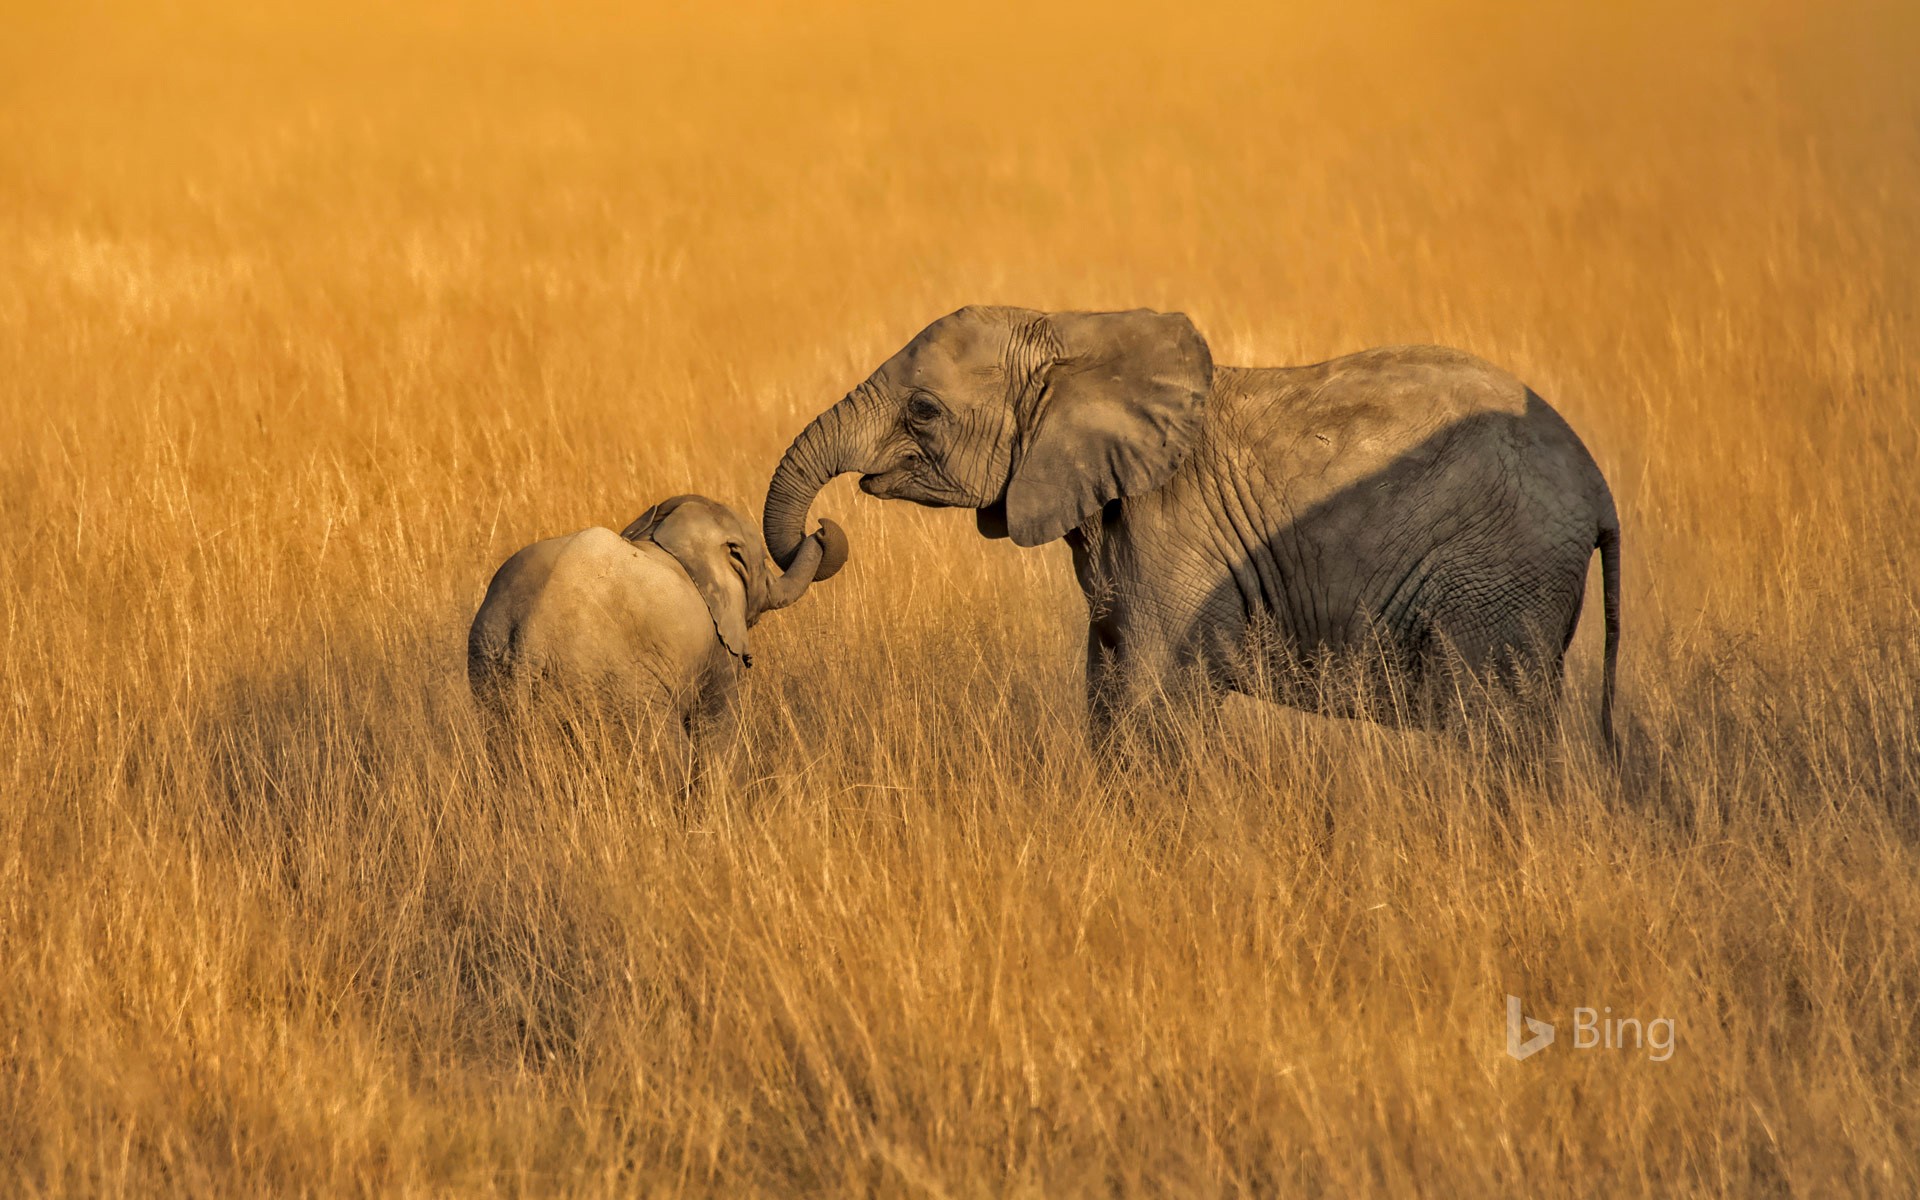 Baby and juvenile elephants in Amboseli National Park in Kenya